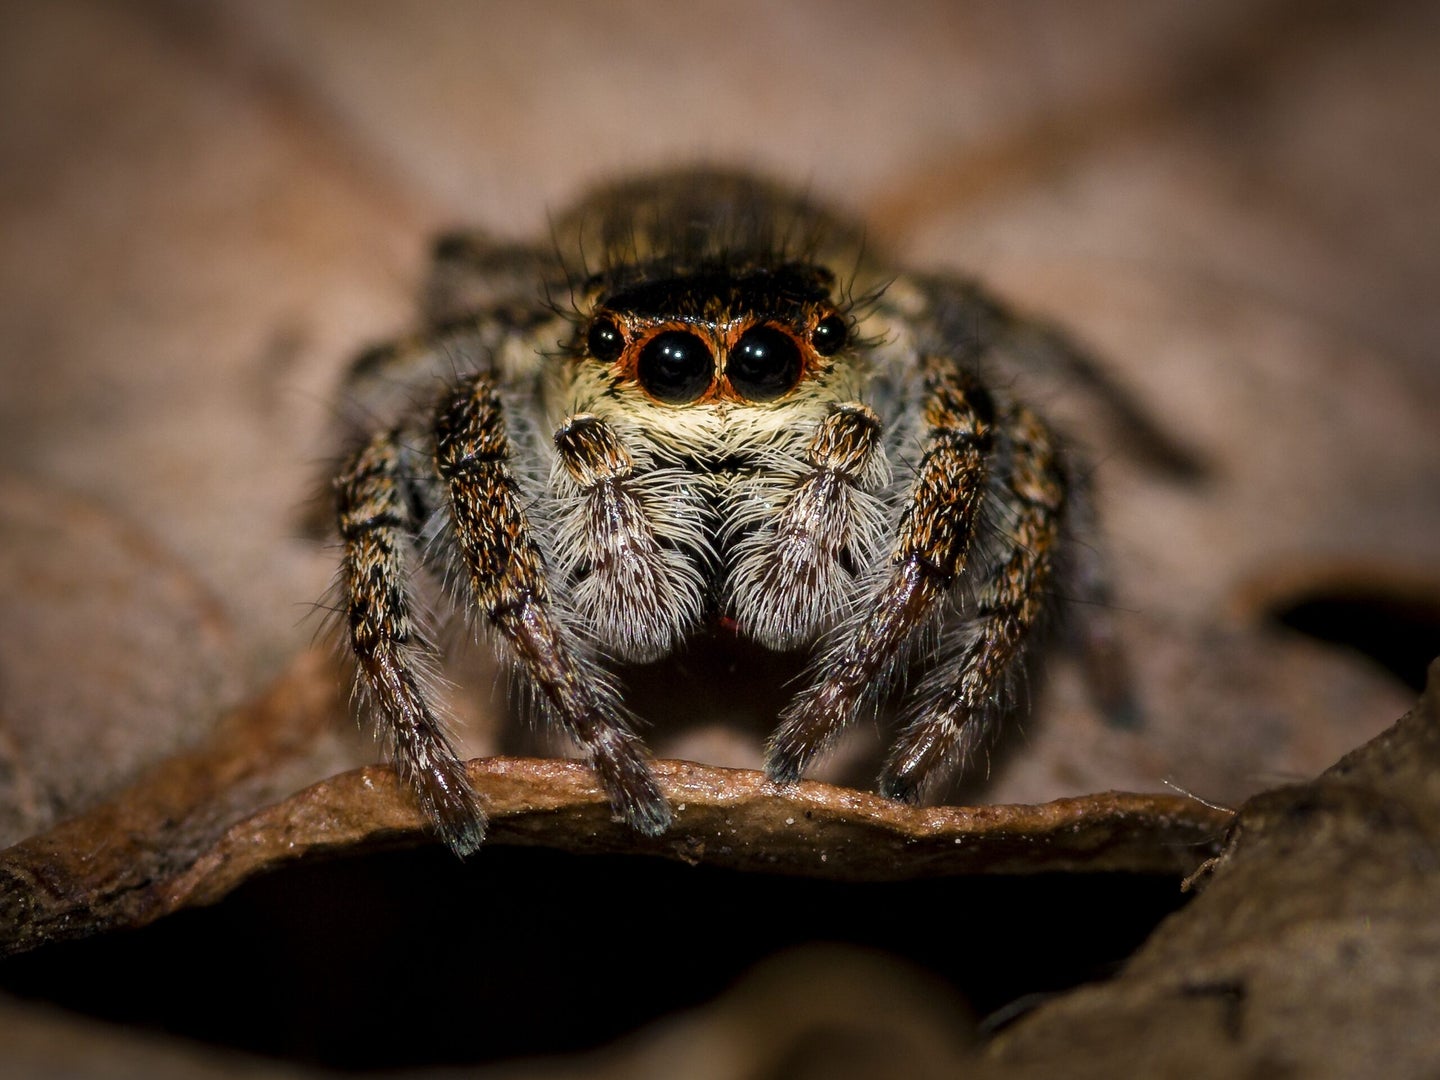 Regular Pest Control Tips for Spiders